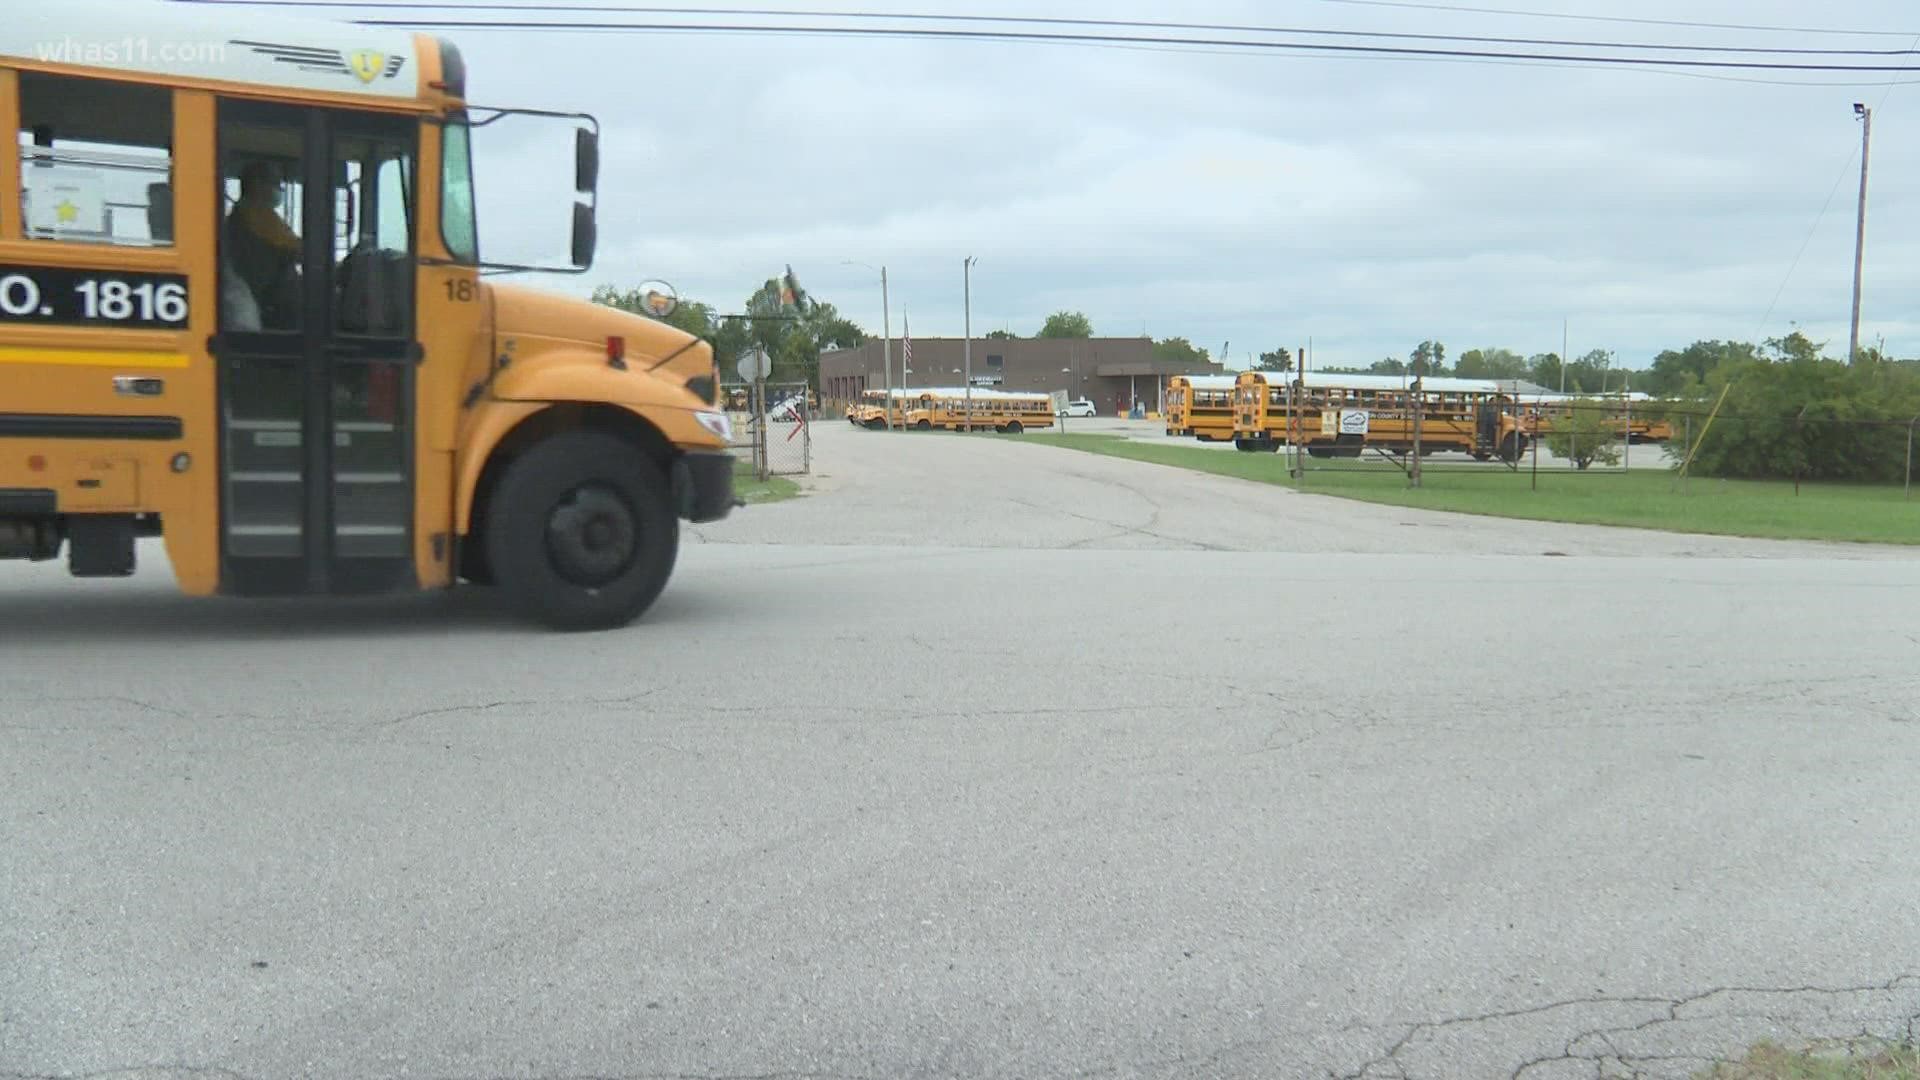 Kentucky's largest school district said they are making progress, adding about 30 more drivers since the start of the school year.